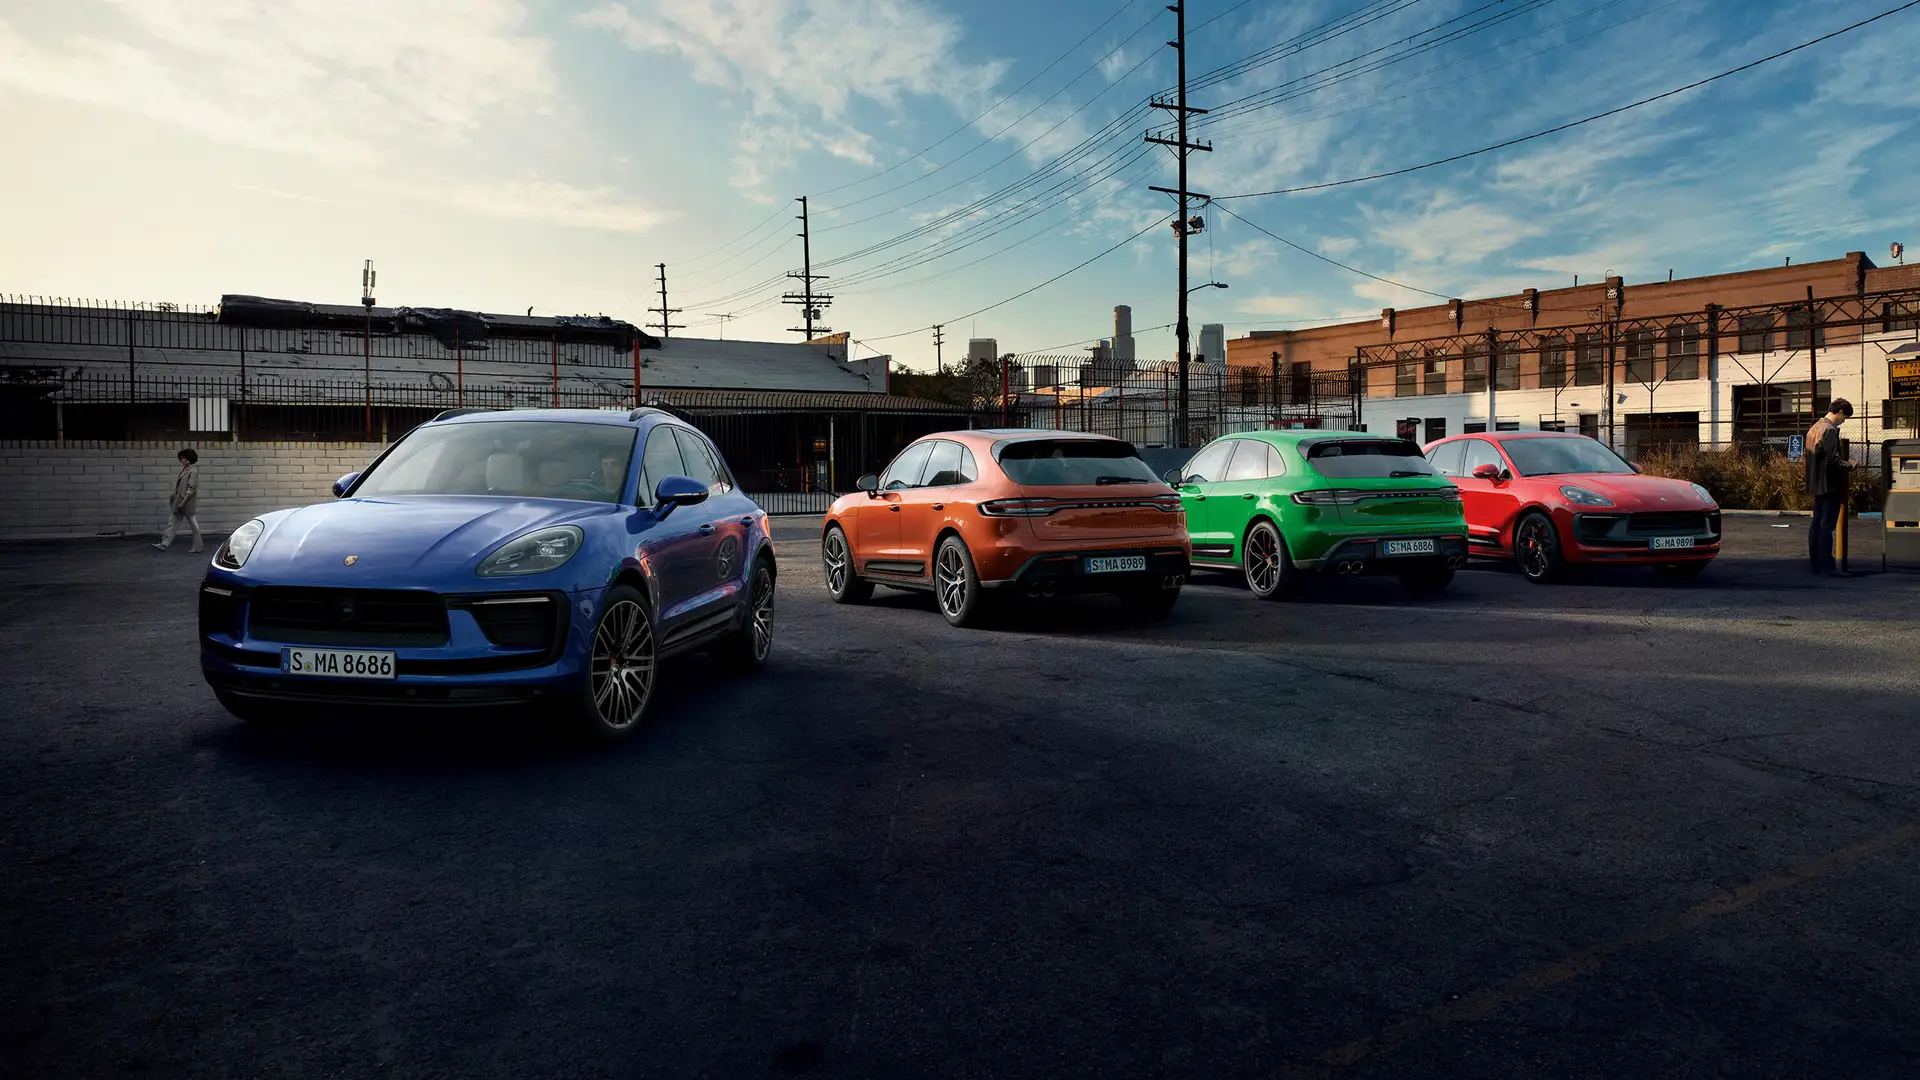 See the new Porsche Macan GTS at Porsche South Orlando near Winter Garden, Florida. It's an exotic sports car that gets up to 93 miles per hour and can go from 0 to 60 in just 3.6 seconds!